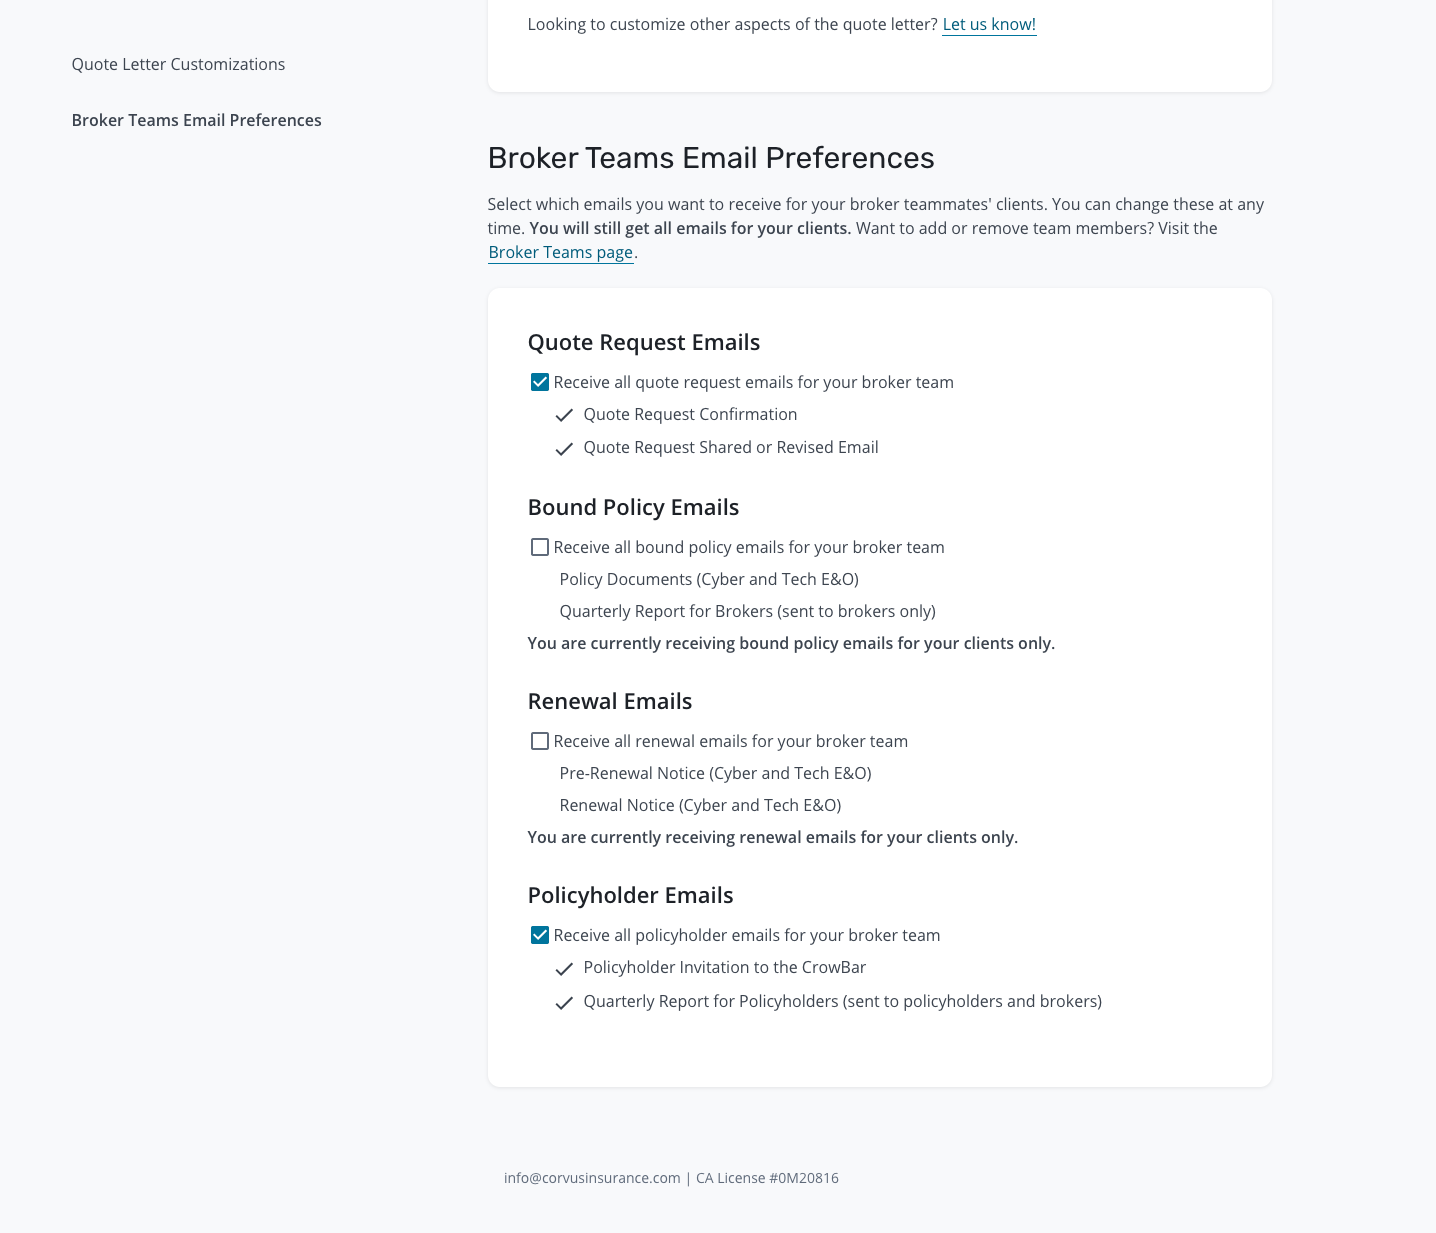 [DIAGRAM] Corvus Policyholder Dashboard - How to Customize Your Broker Team Emails